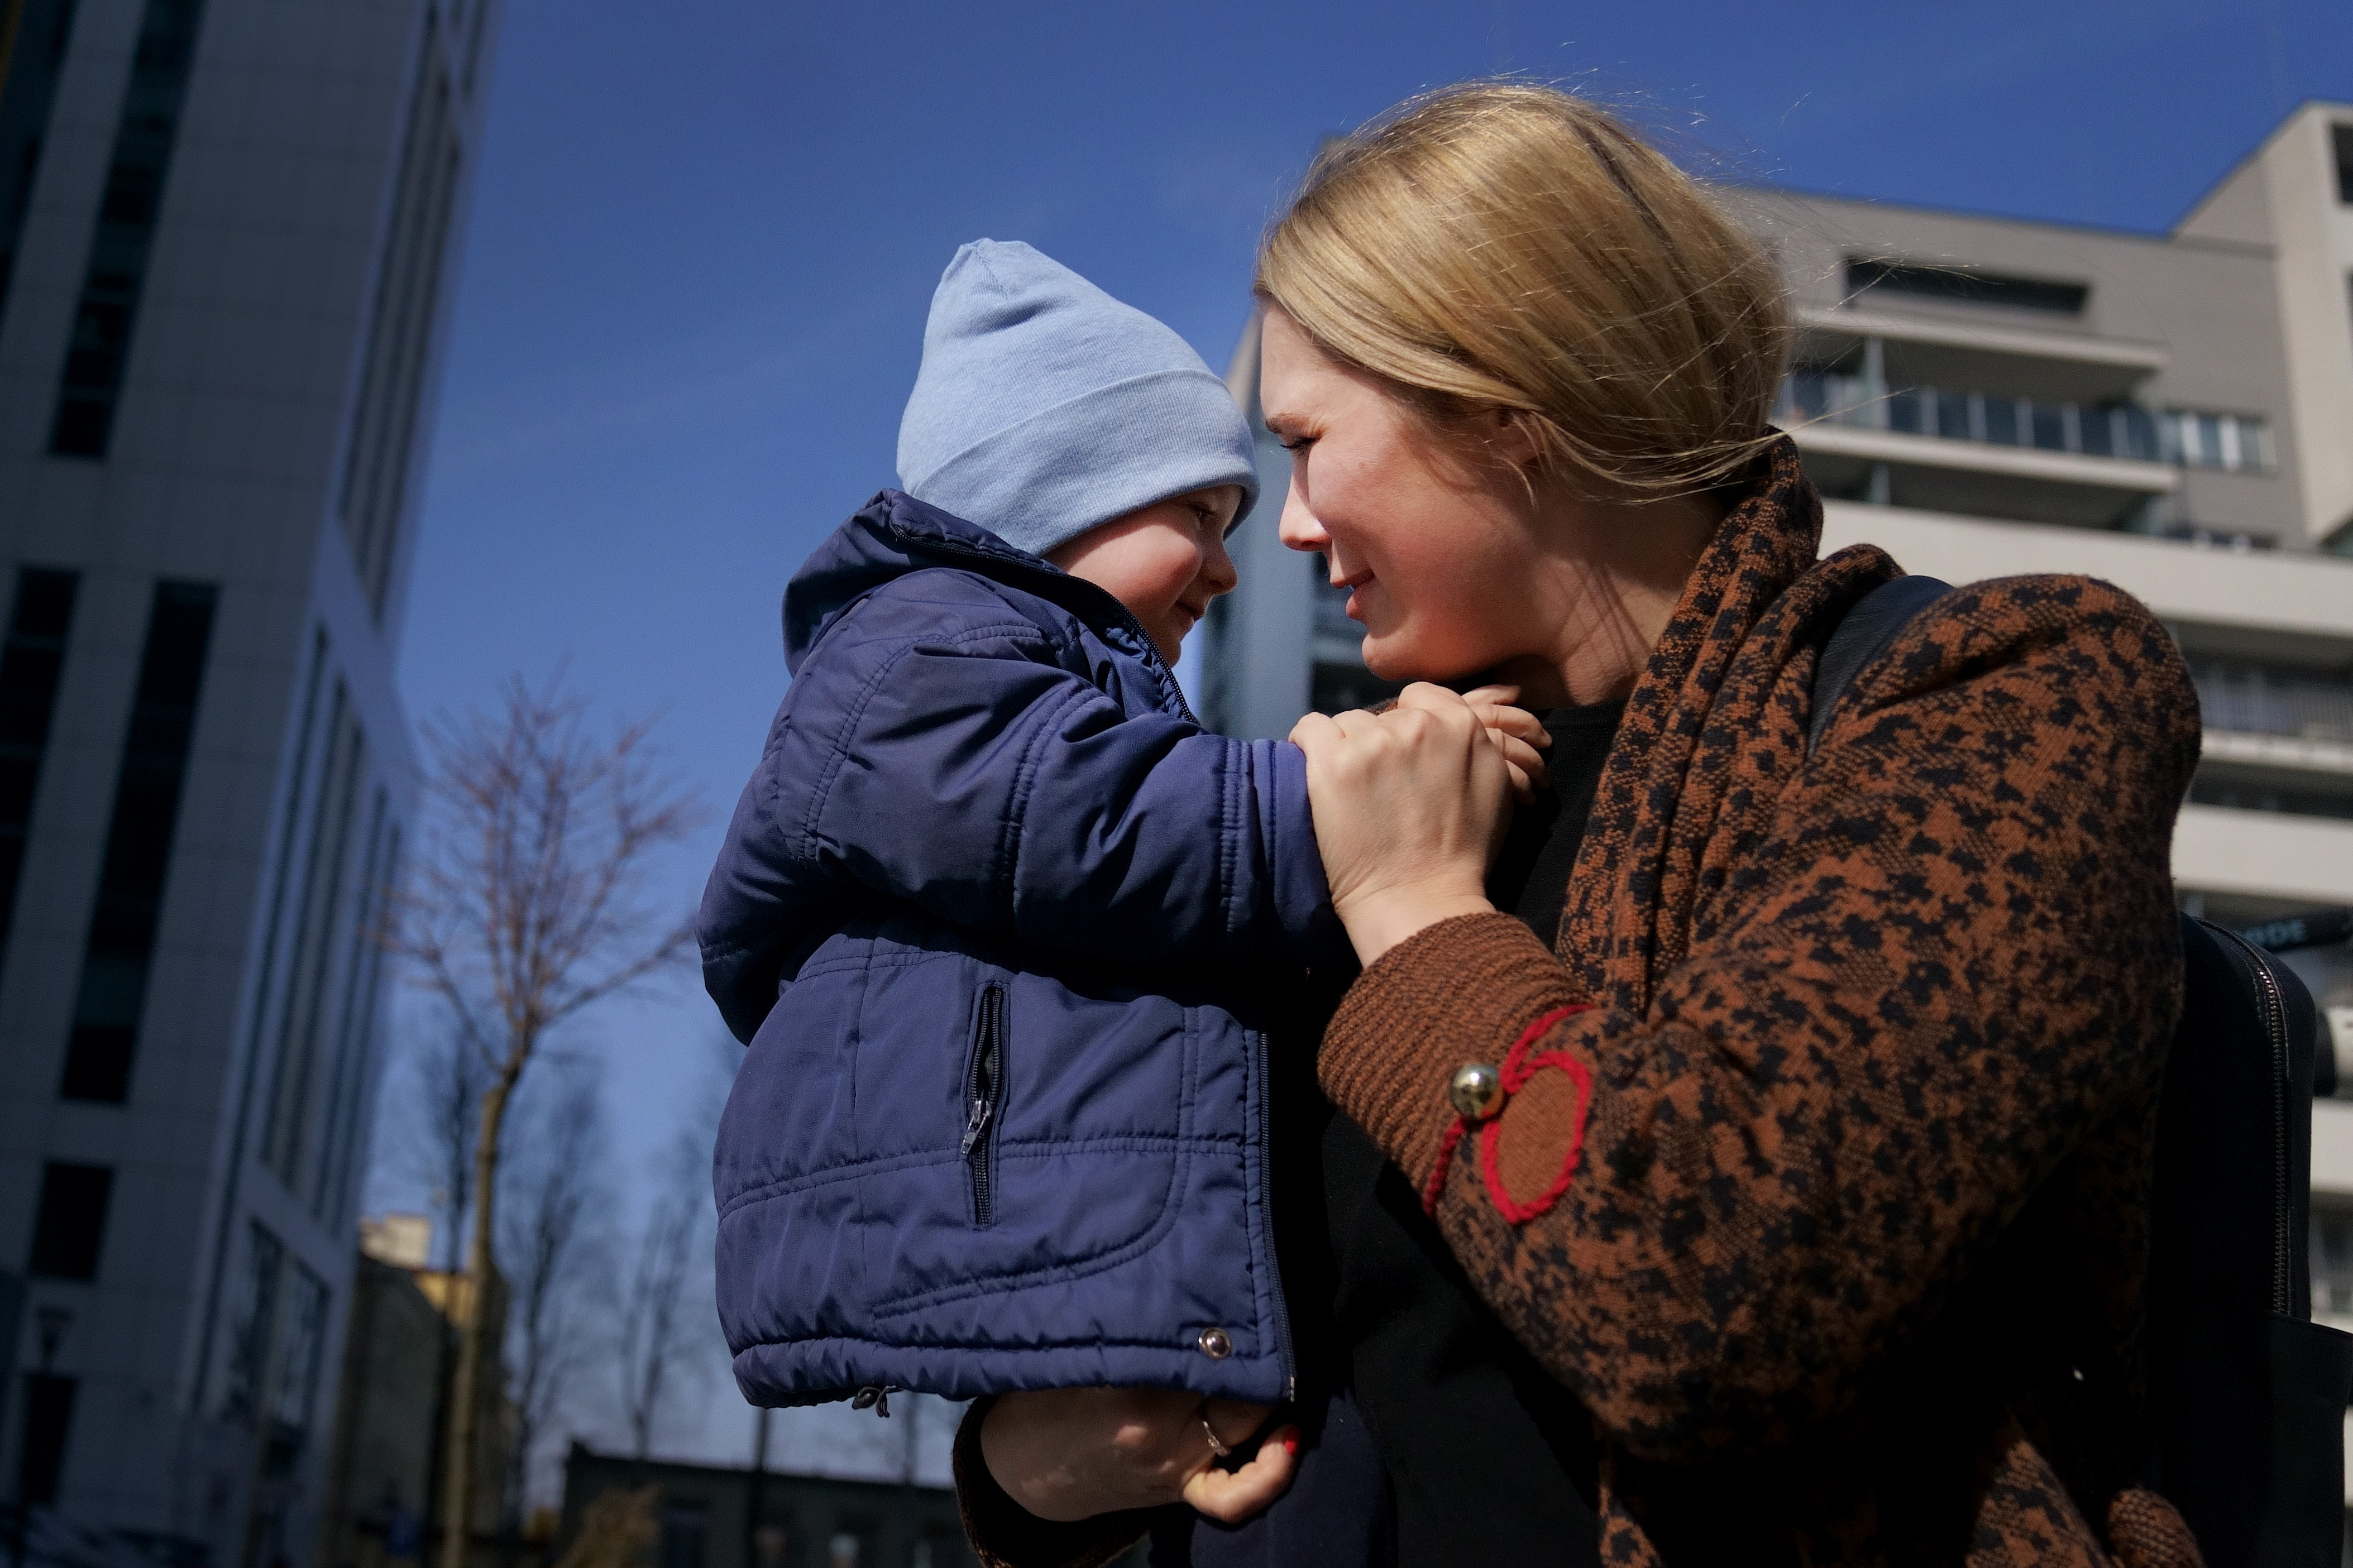 Reunited with her son in Rzeszow, Poland, after her extended family fled the war in Ukraine 